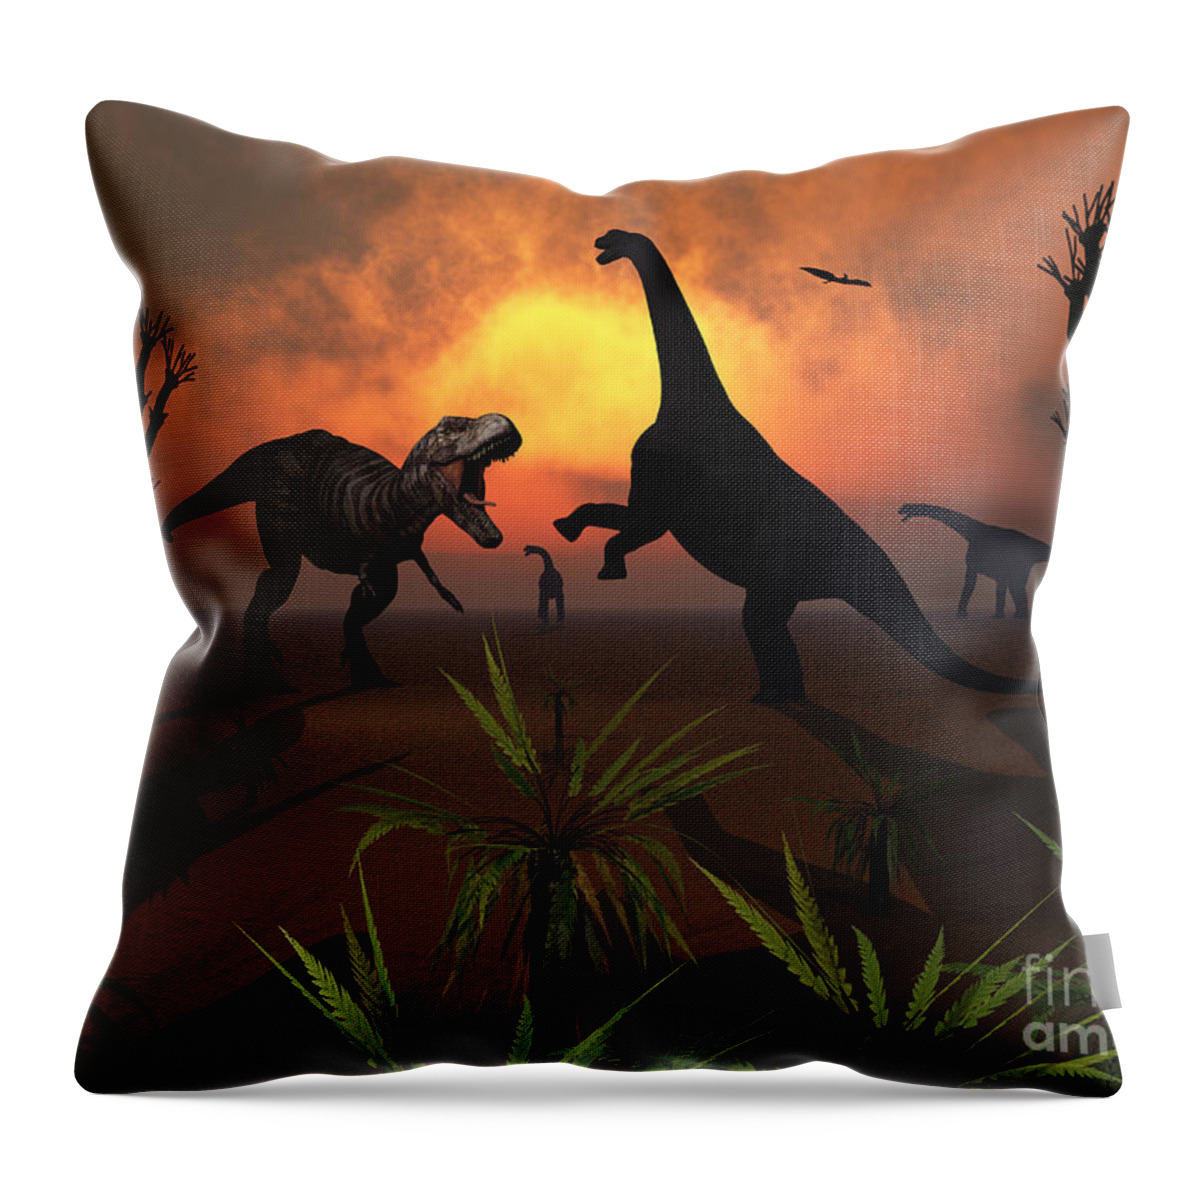 Biped Throw Pillow featuring the digital art T. Rex Confronts A Group by Mark Stevenson